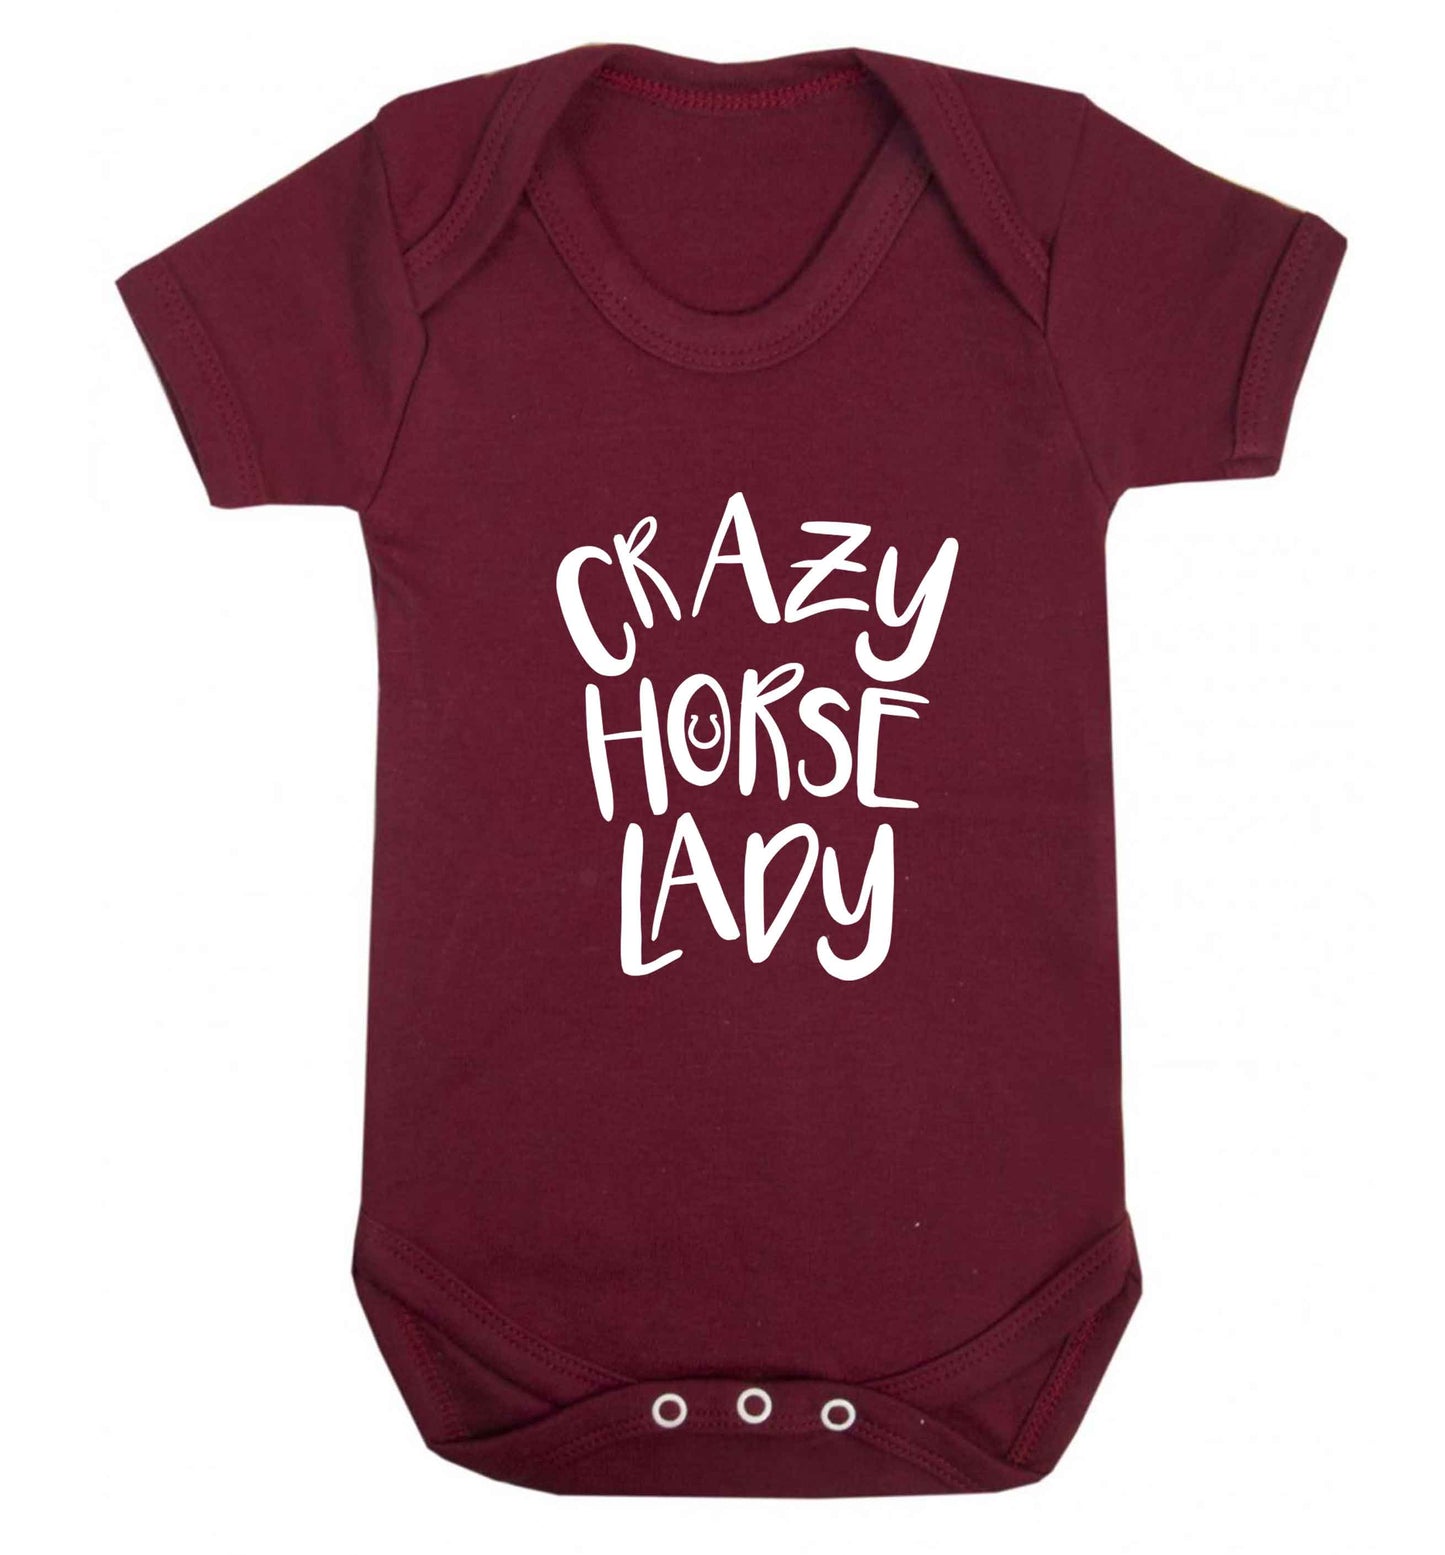 Crazy horse lady baby vest maroon 18-24 months